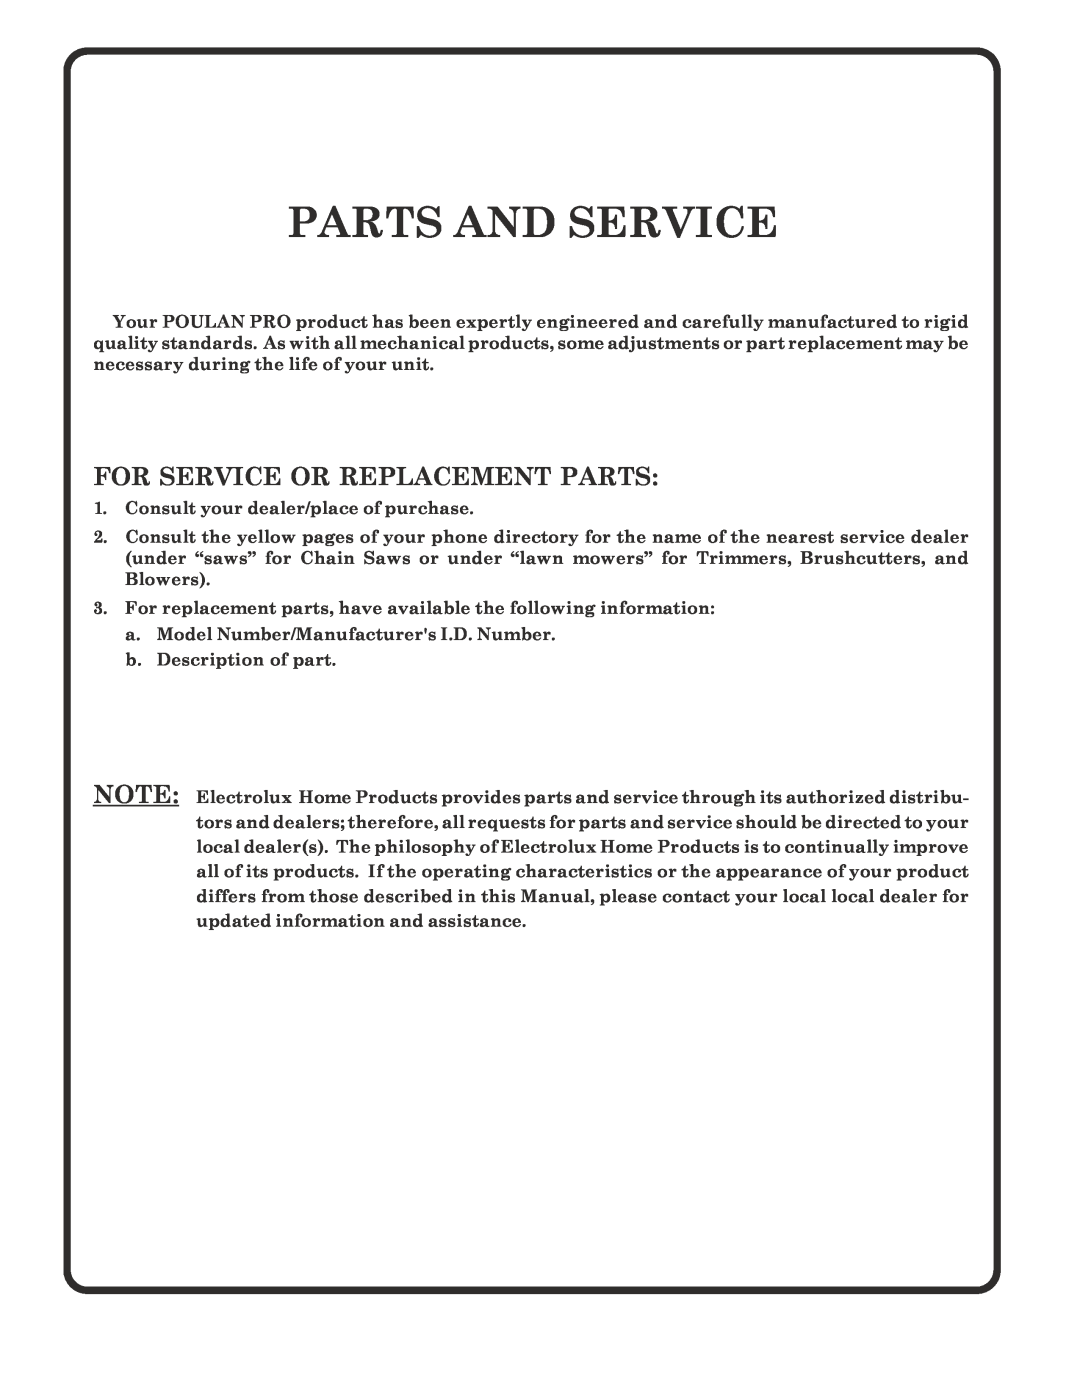 Poulan PR185H42STF owner manual Parts And Service, For Service Or Replacement Parts 